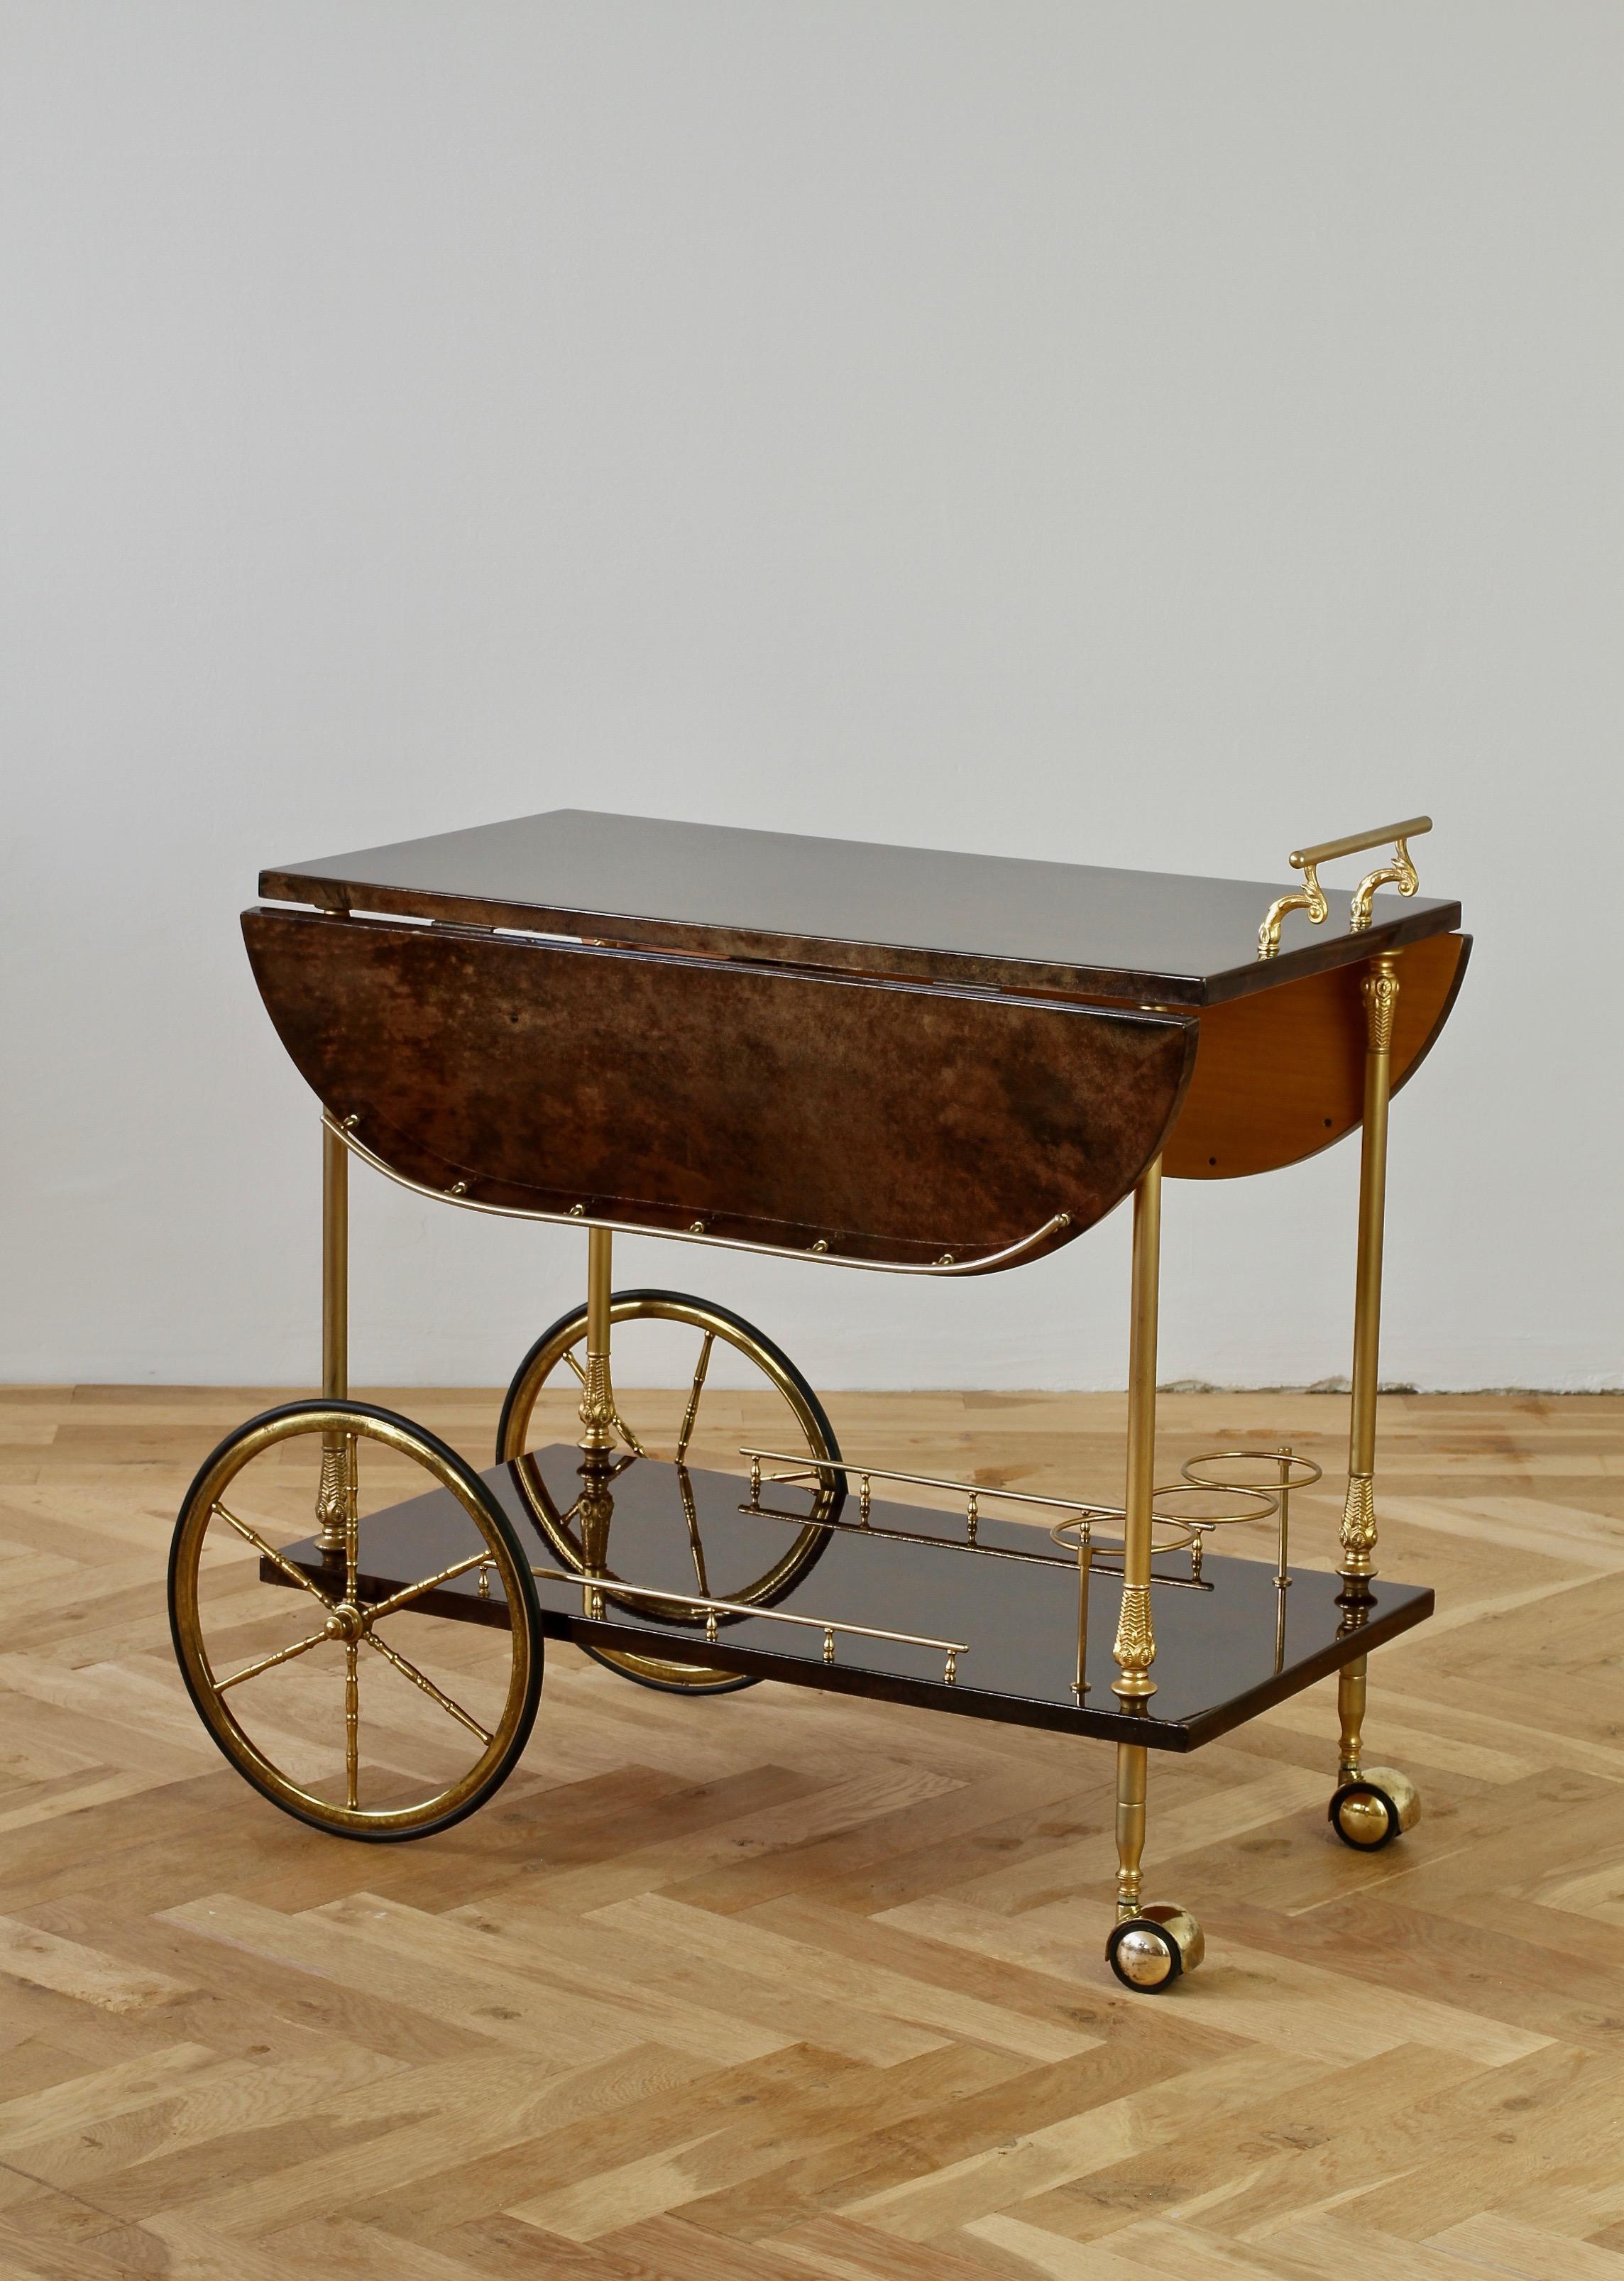 Large Aldo Tura Italian bar cart, drinks trolley or stand with curved drop-leaf extensions, made in Milan, circa 1968. Aldo Tura was a master craftsman using the finest materials he created such wonderful pieces such as this. Using a deep brown